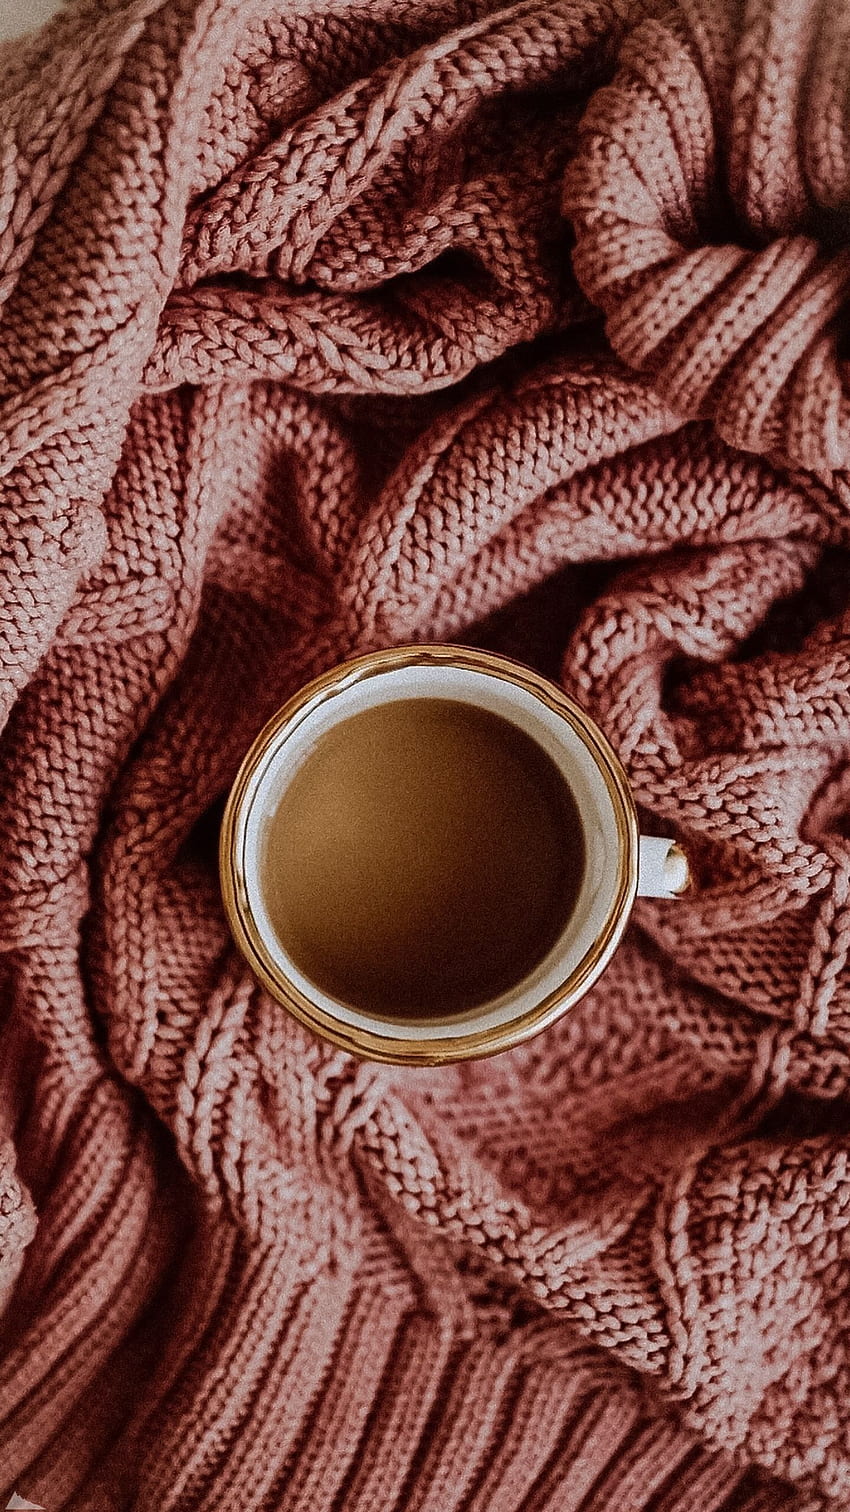 Coffee and Sweater. Autumn cozy, Autumn aesthetic, Fall HD phone wallpaper